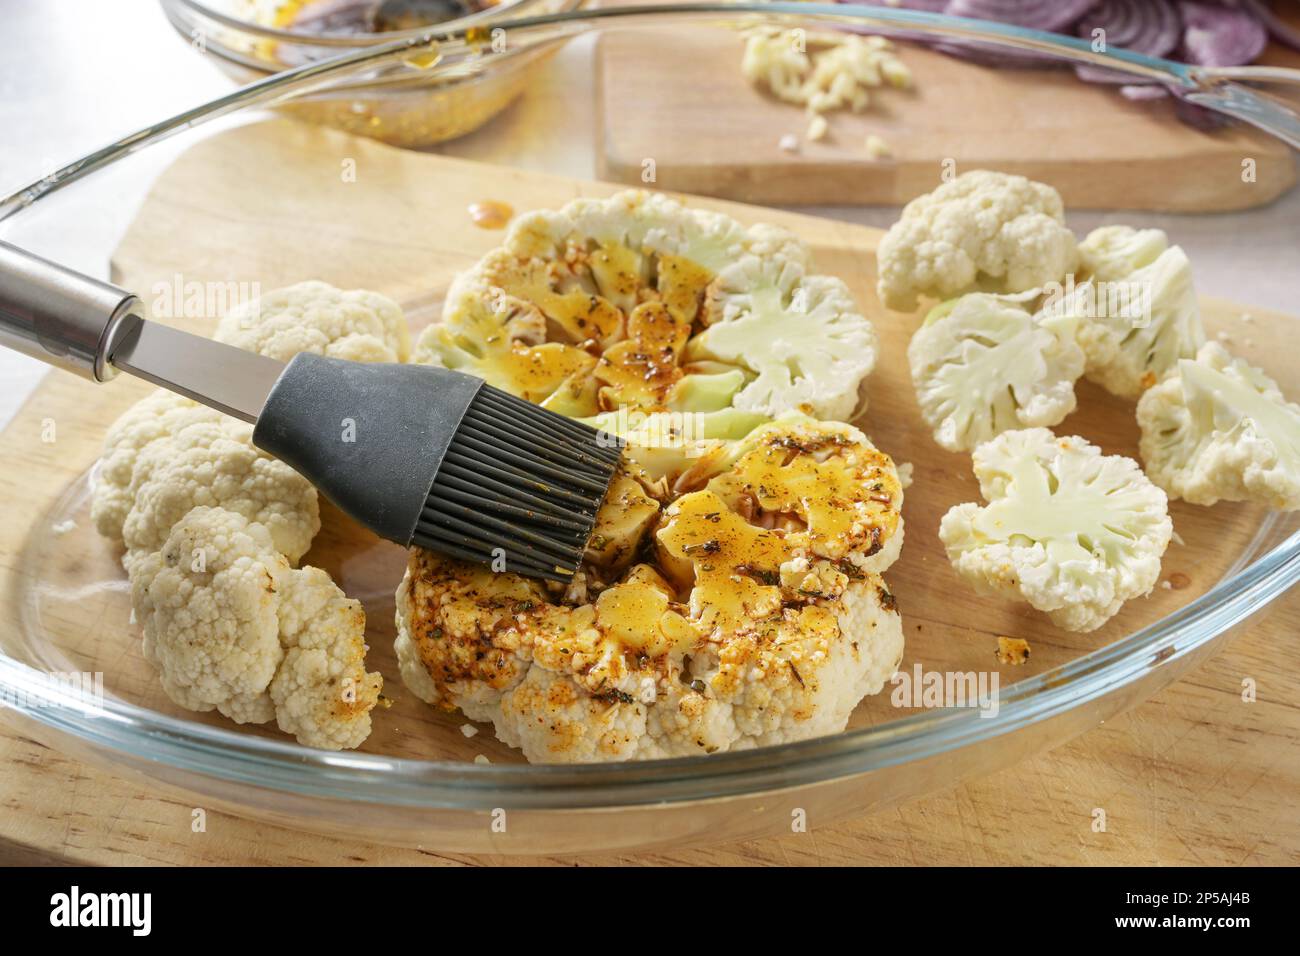 Raw cauliflower slices in a glass casserole are coated with a mixture of spices, herbs and olive oil by a silicone brush, cooking preparation for bake Stock Photo